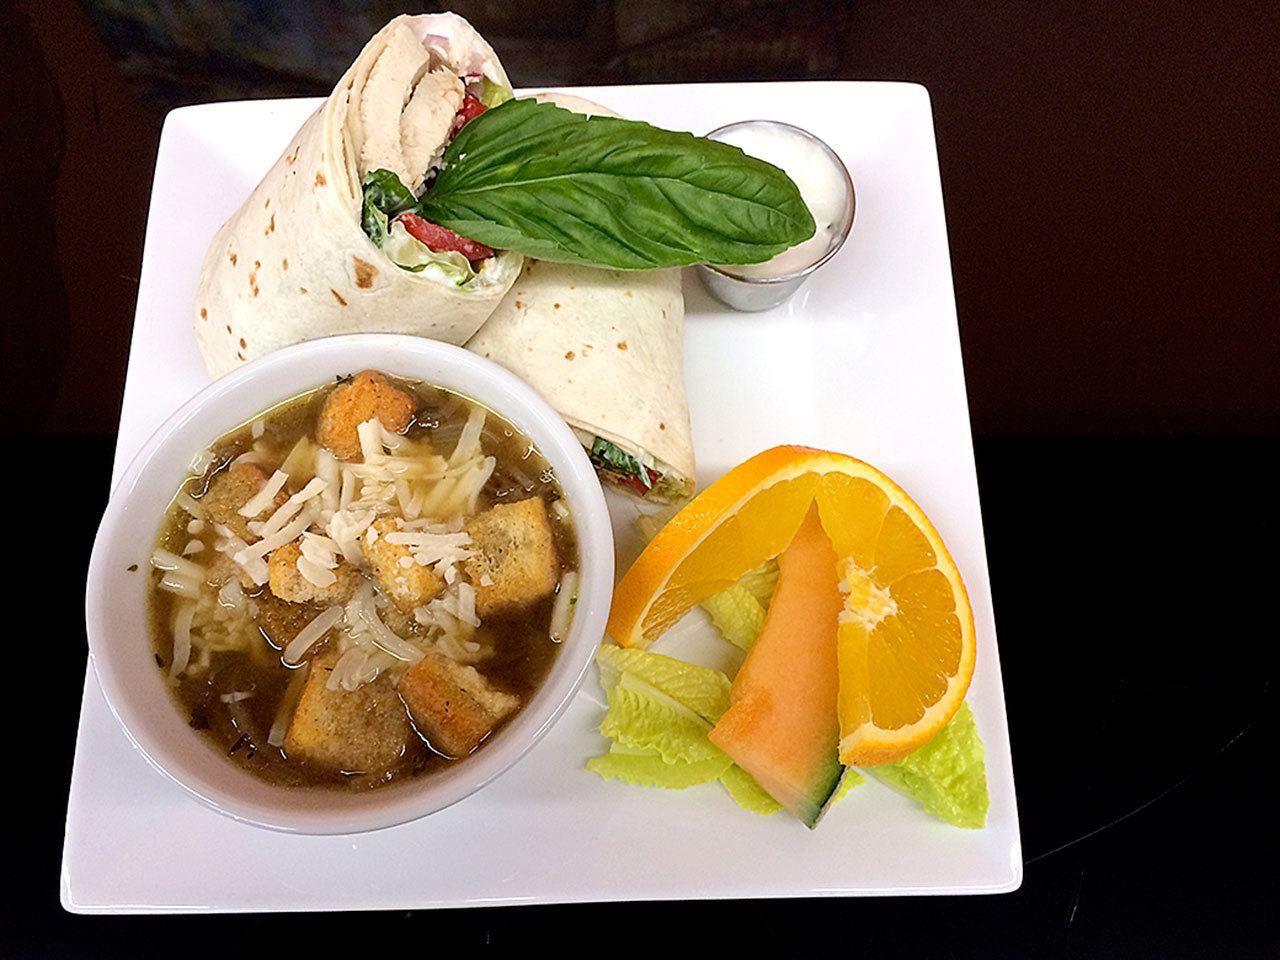 French onion soup and Mediterranean chicken wrap are among the dishes served at Cafe Dijon. Gale Fiege / The Herald